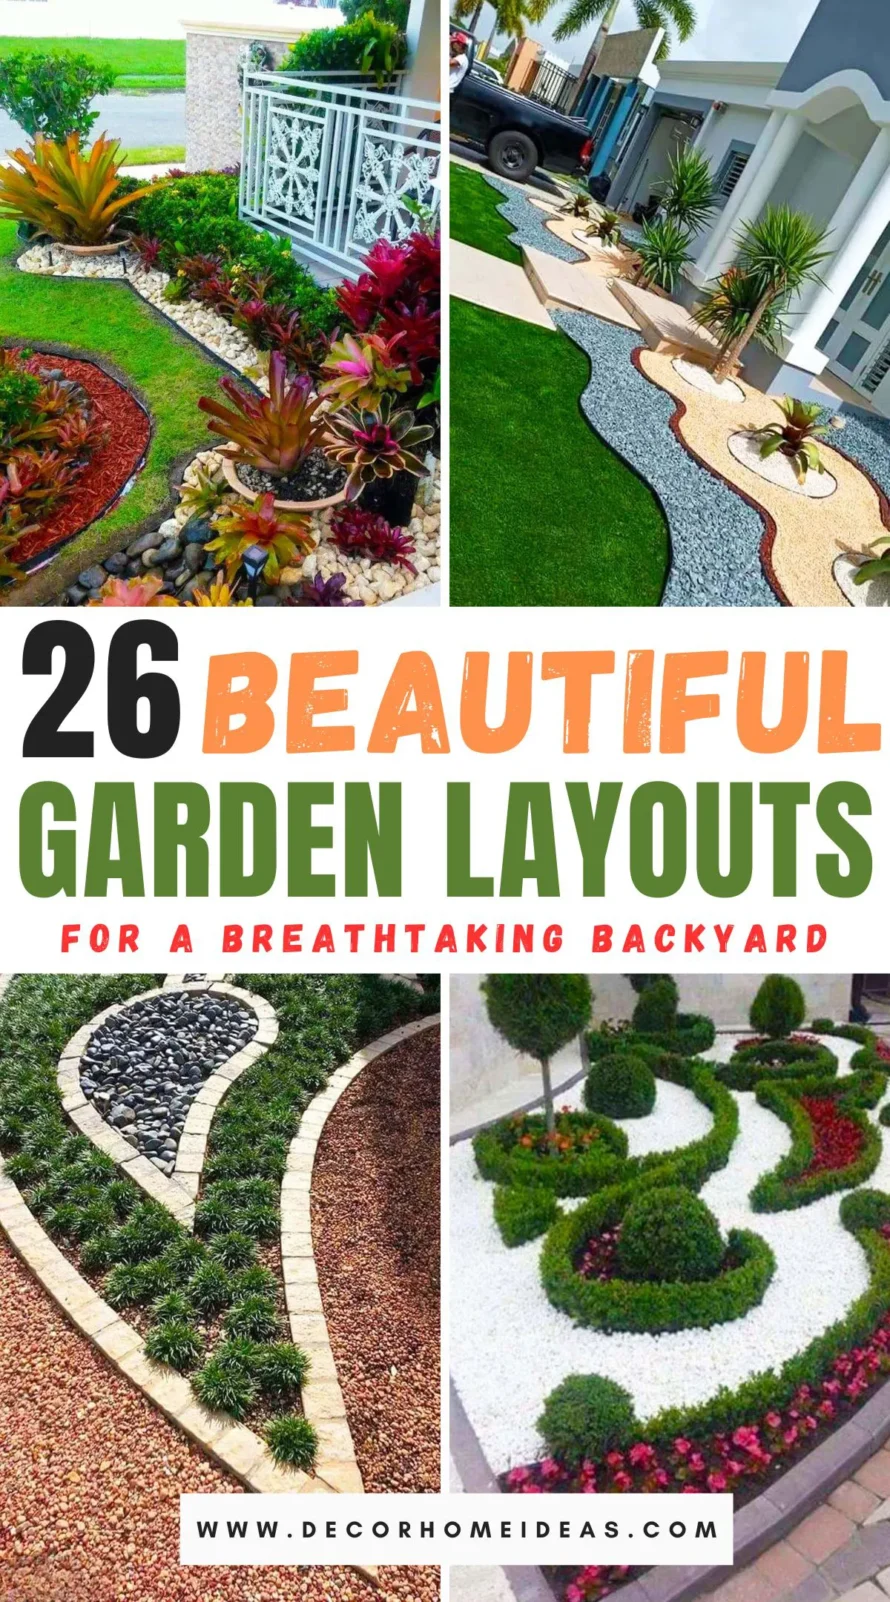 Unveil 26 enchanting garden layouts that promise to turn your backyard into a mystical escape. Whether you crave a tranquil Zen garden or a whimsical flower haven, these designs are tailored to inspire awe and wonder. Step into a world of magical outdoor spaces!